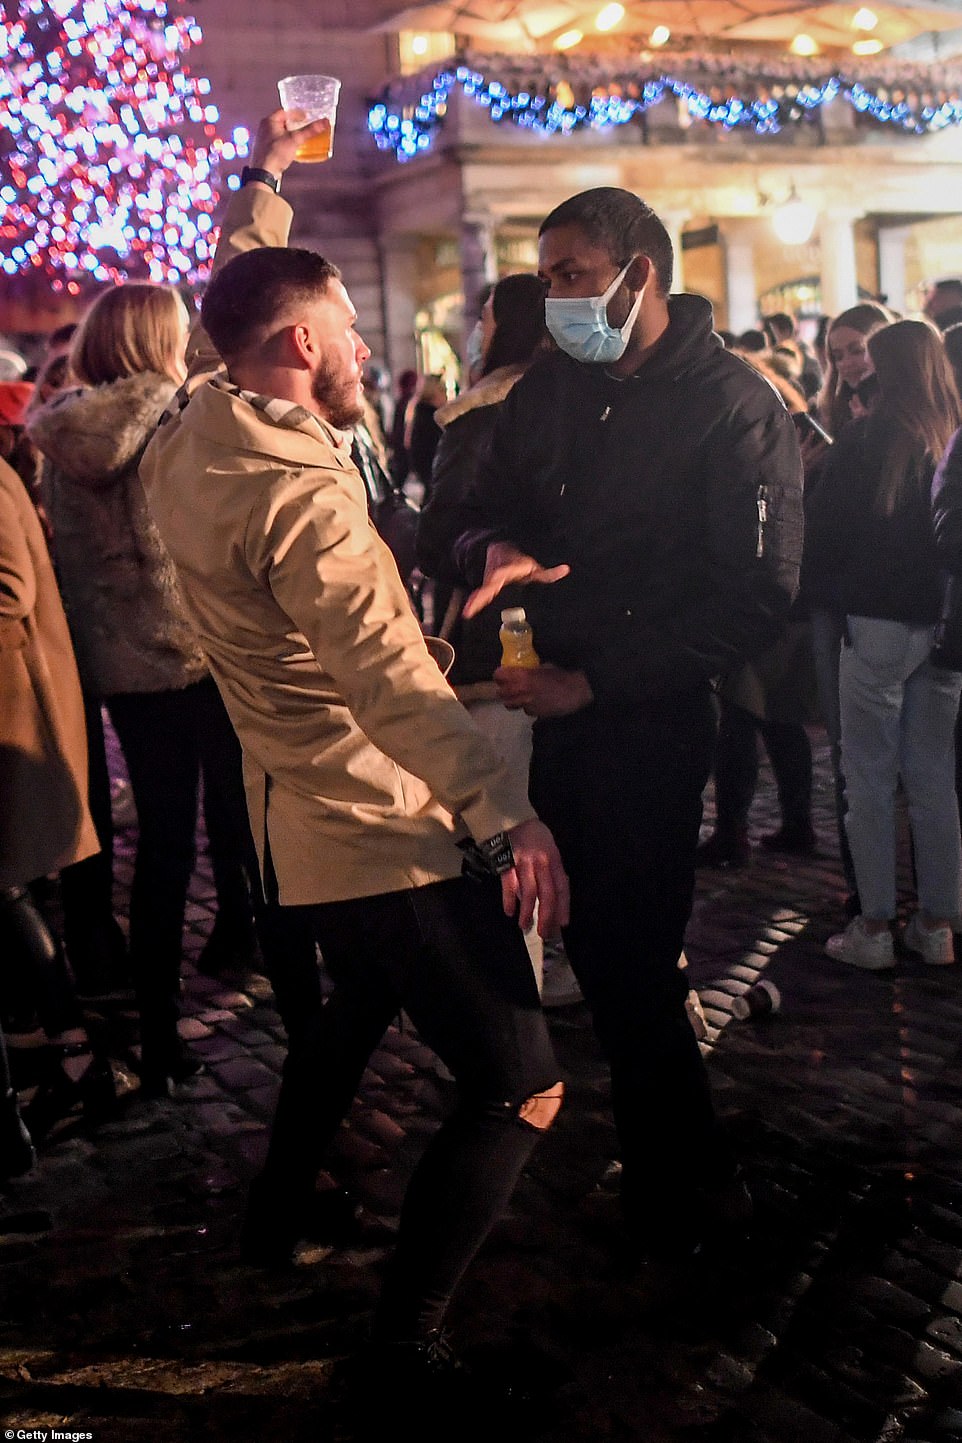 36494538 9021981 a man holding a pint dances in front of a man wearing a mask in a 20 1607244995609